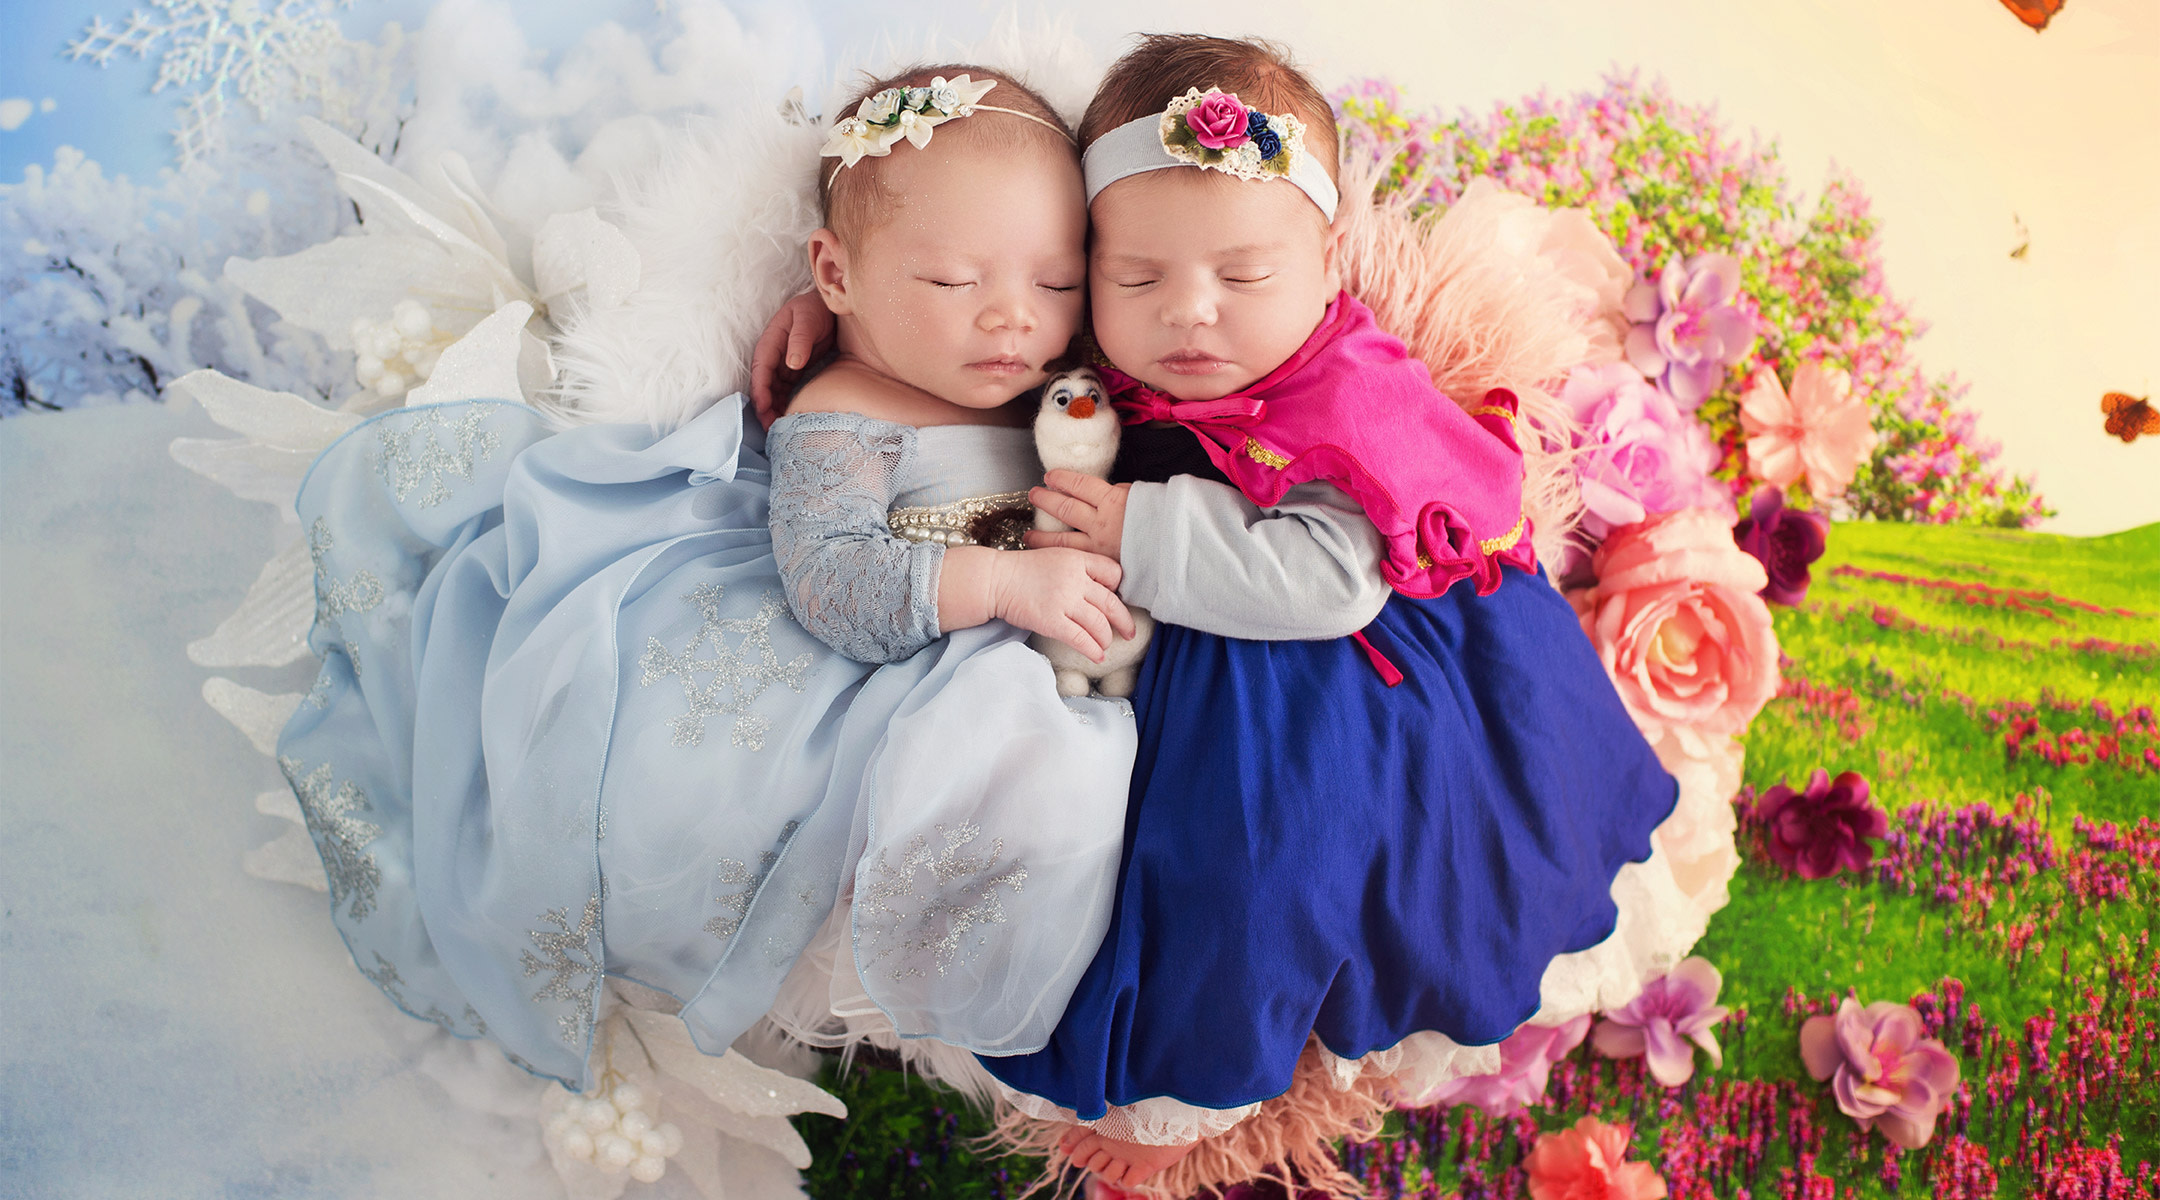 newborns dressed as frozen characters, anna and elsa.